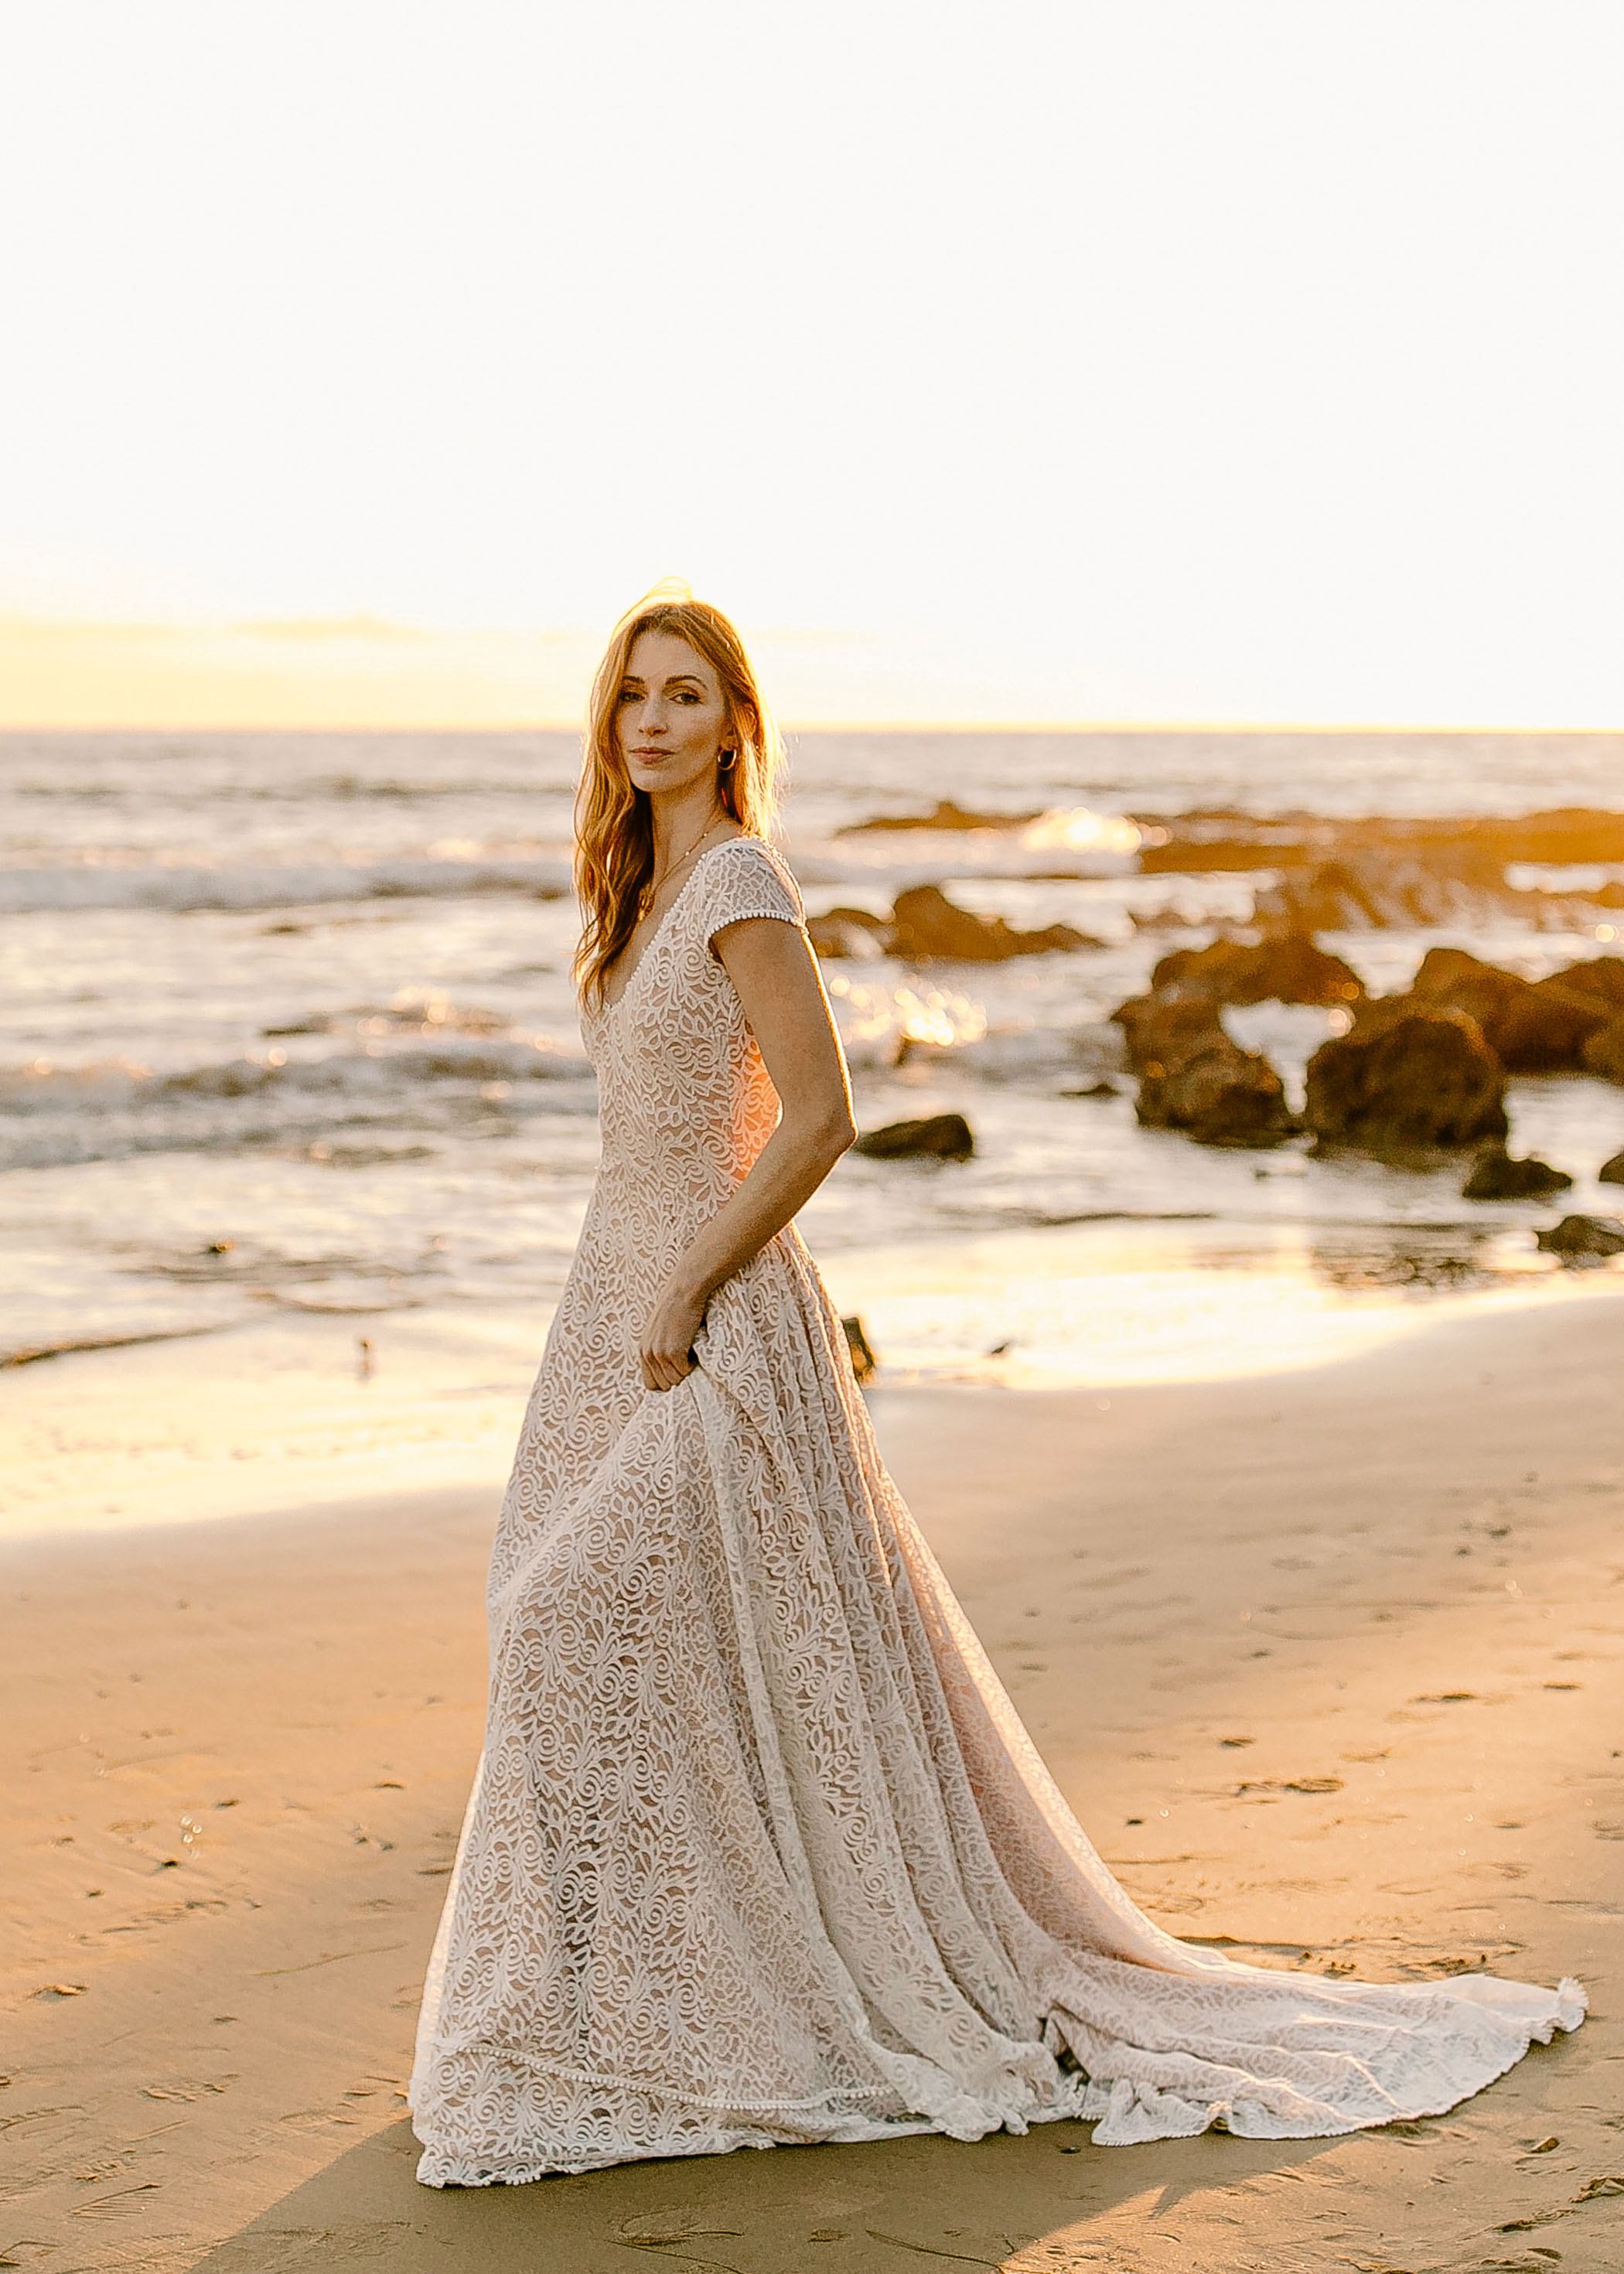 Celebrate New Beginnings with Wear Your Love?s 2022 Wedding Dress Collection